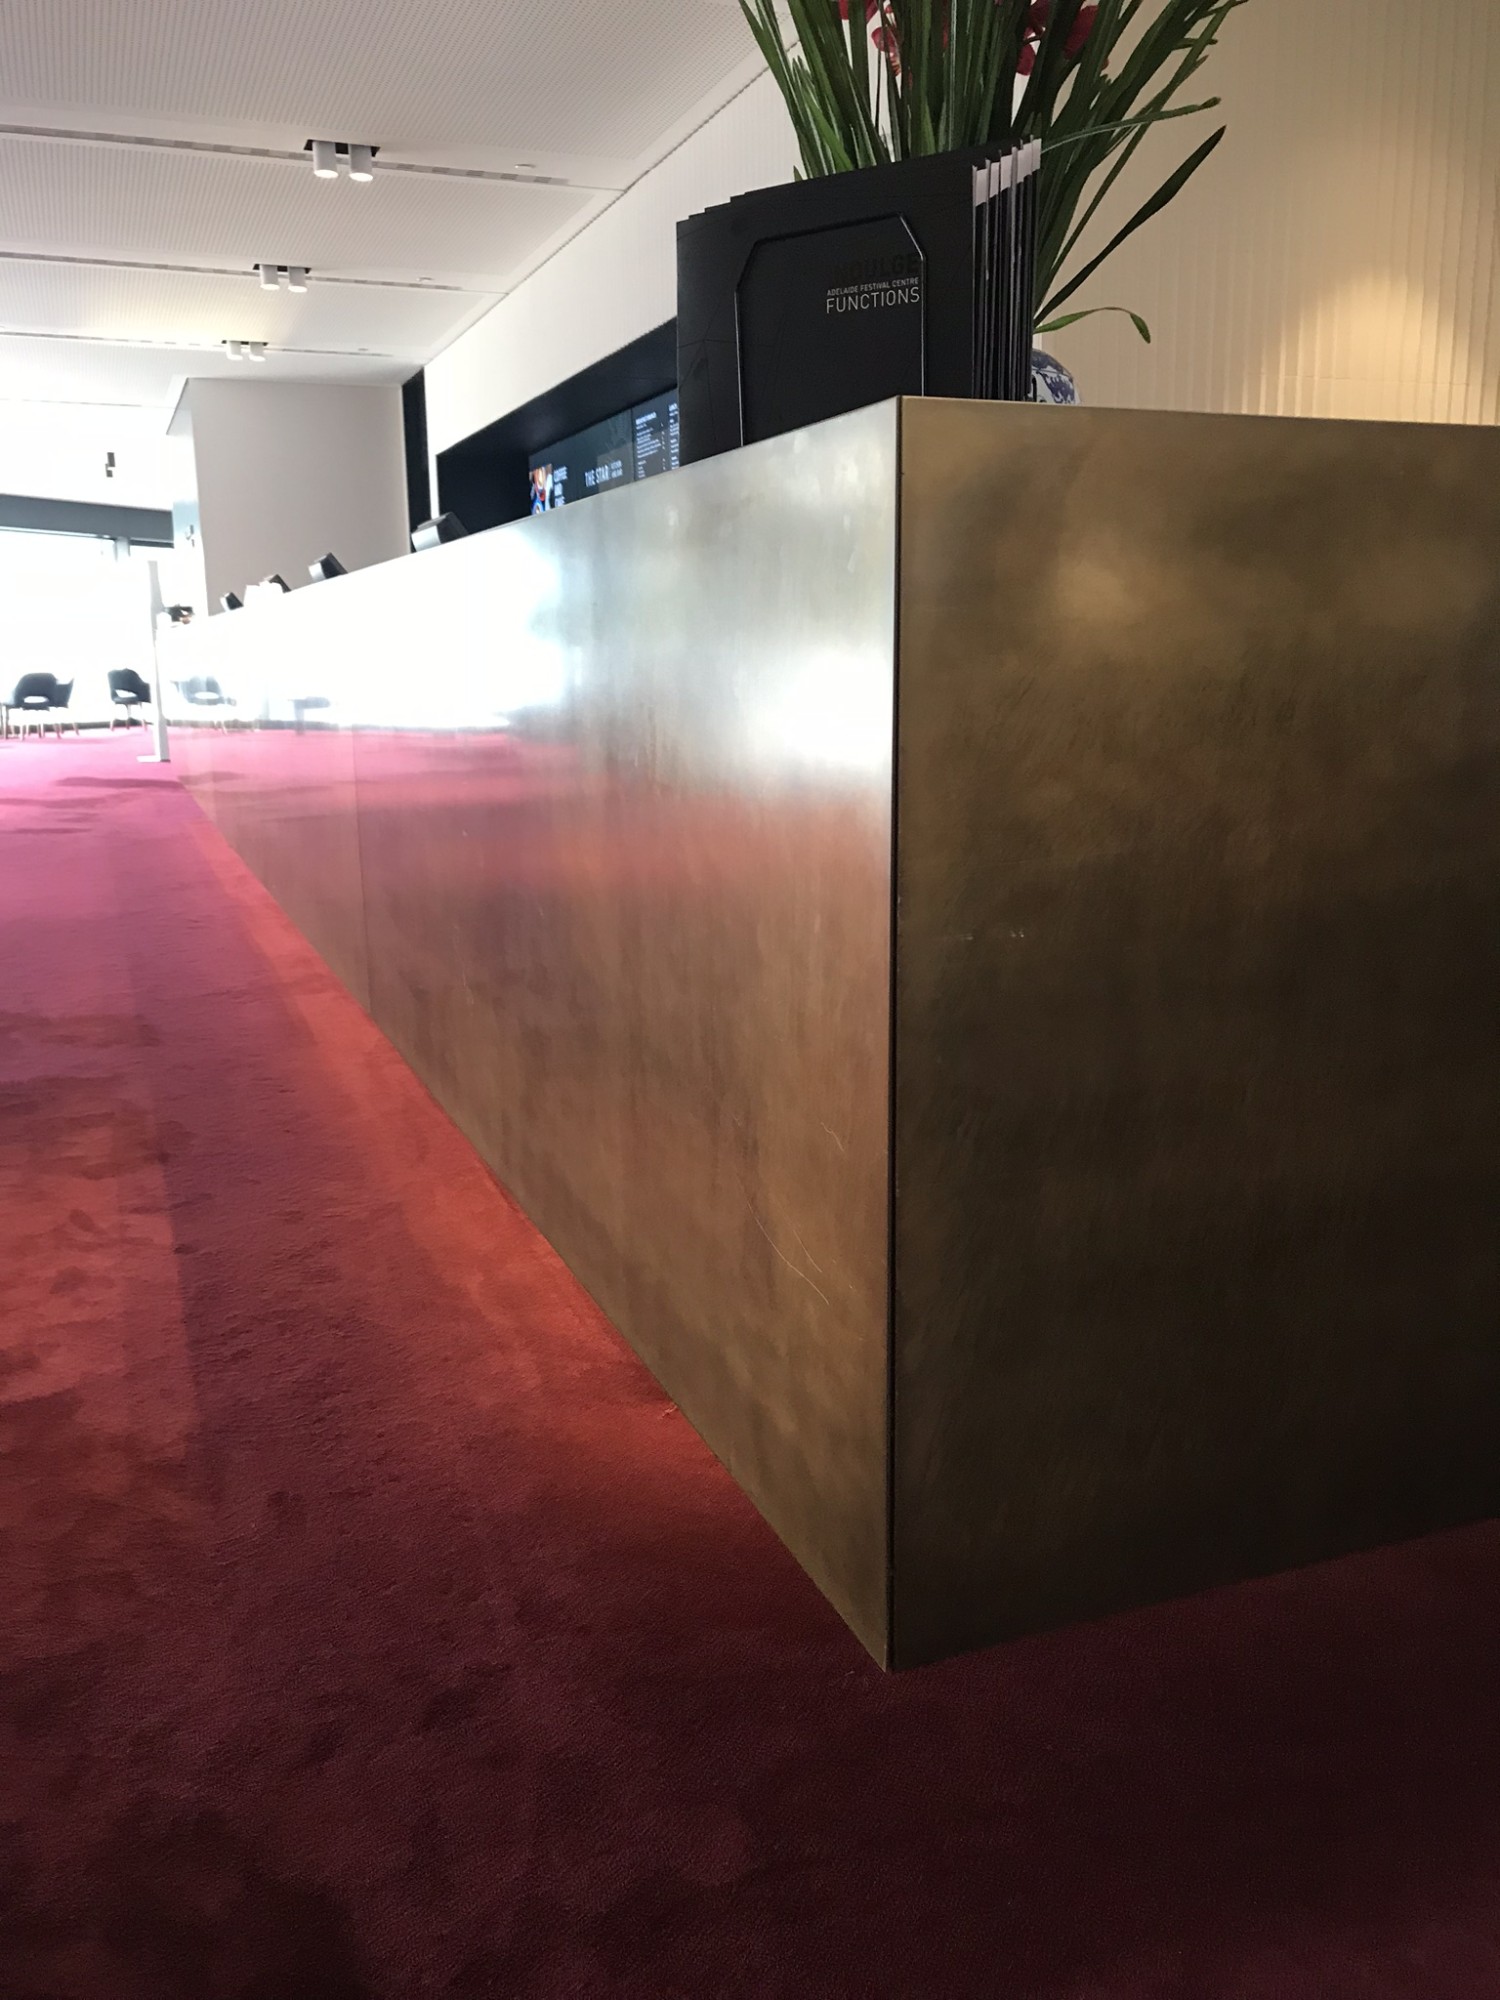 Light/ Medium patina to brass plated aluminium and stainless_sigange, reception, bins, framing, oeprable walls